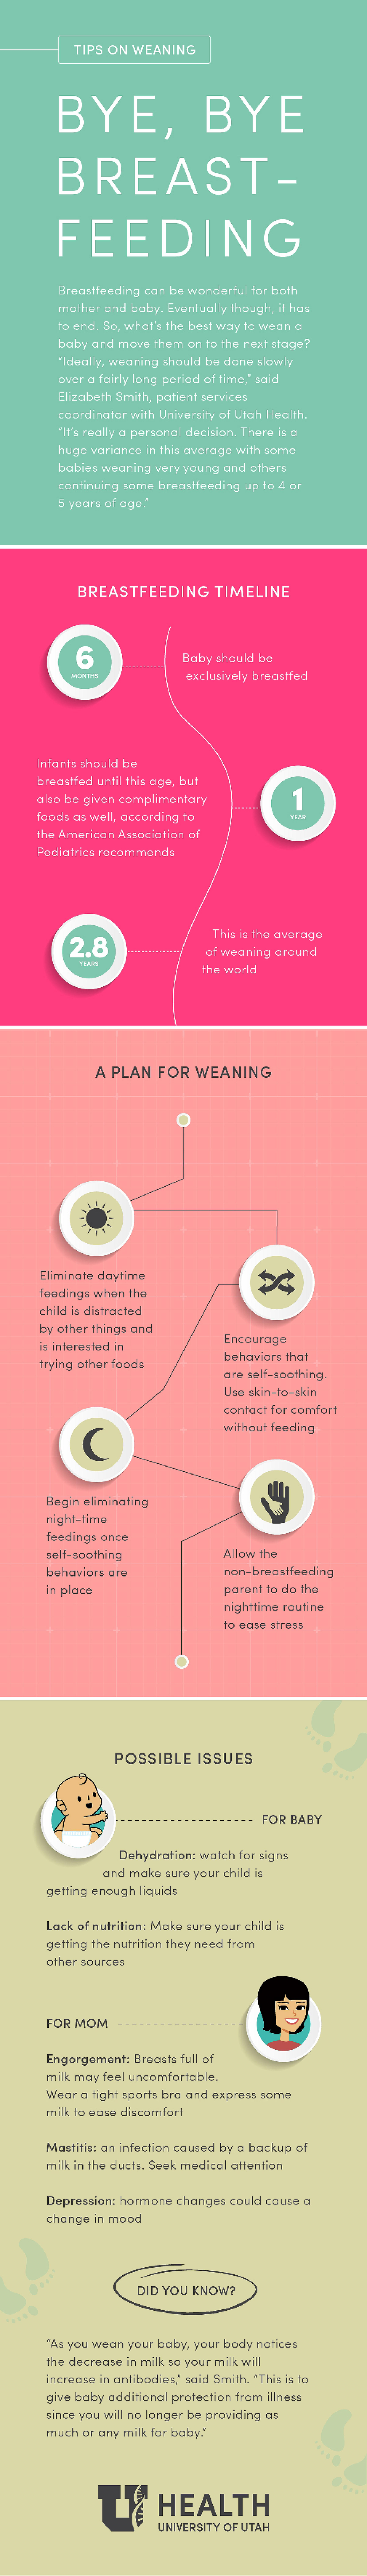 Tips on weaning infographic